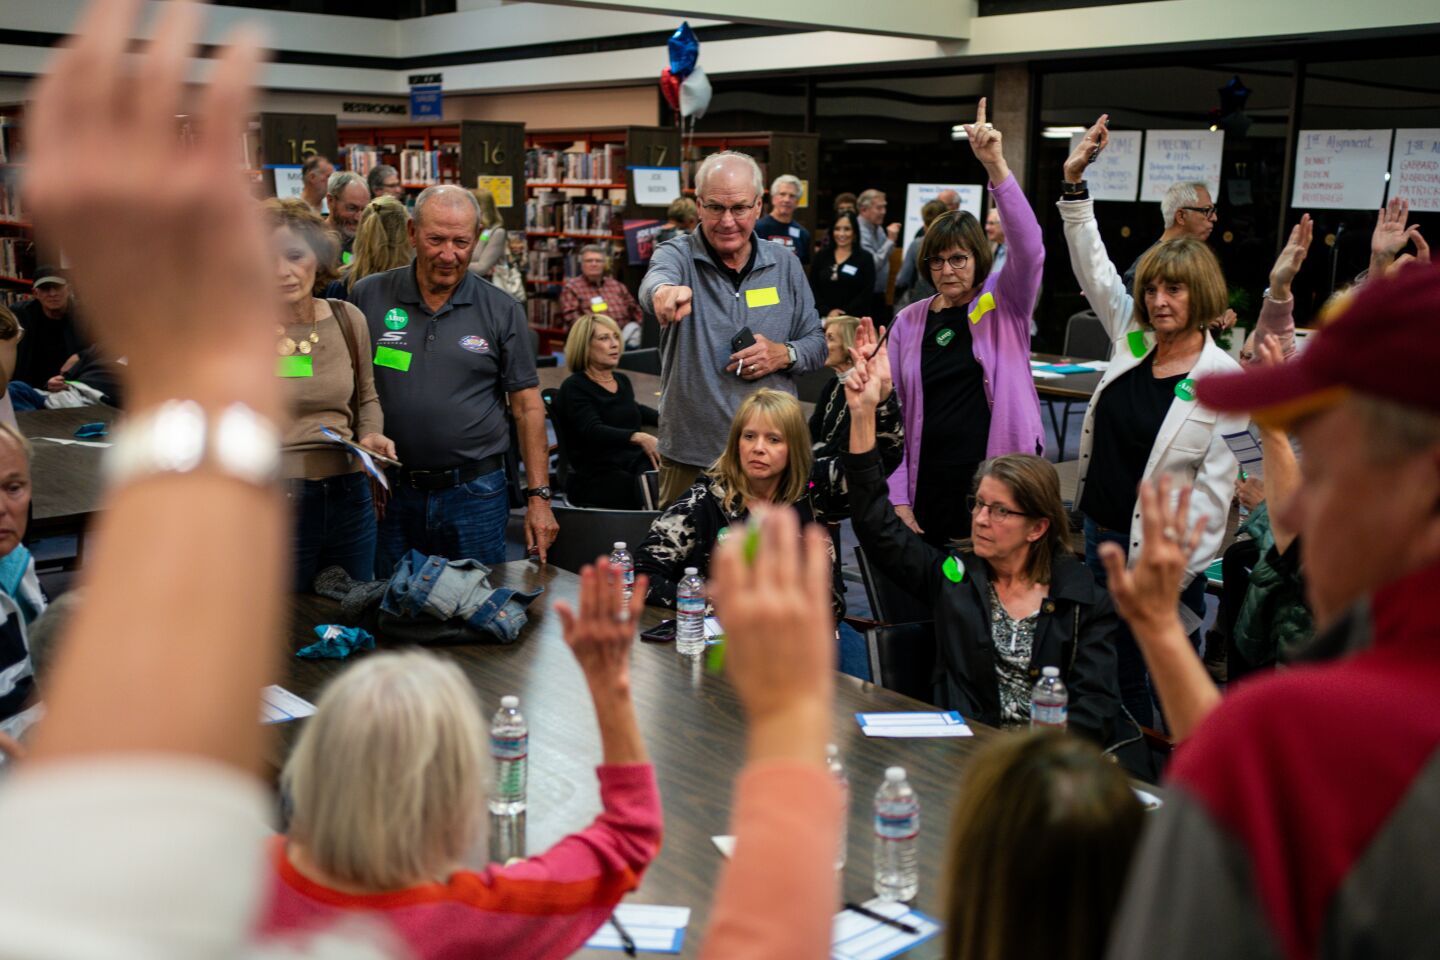 Scott Kirkpatrick, center, counts raised hands of caucusgoers during a satellite Iowa caucus at the Palm Springs Public Library on Monday in Palm Springs.